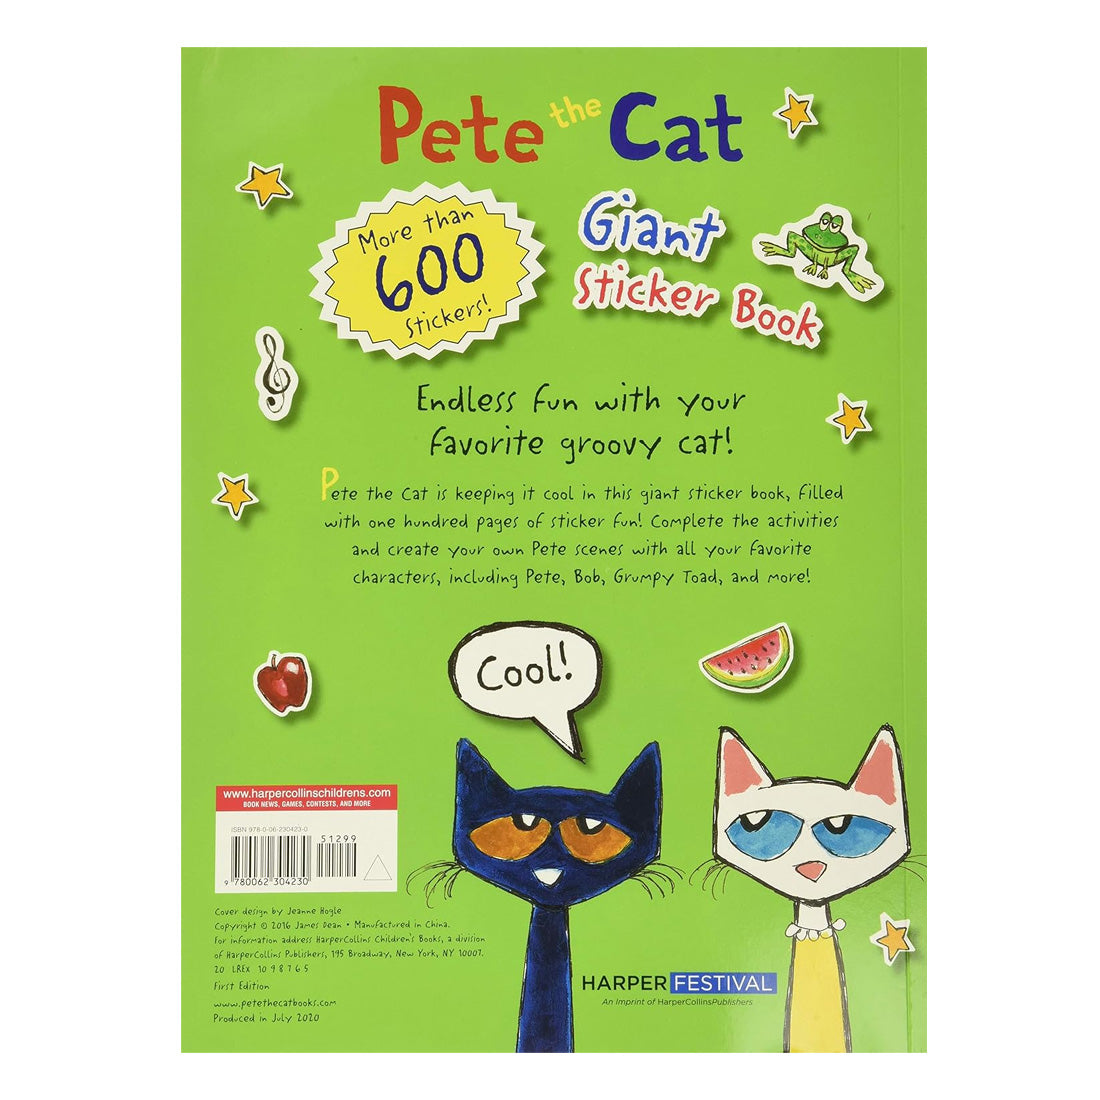 Pete The Cat: Giant Sticker Book